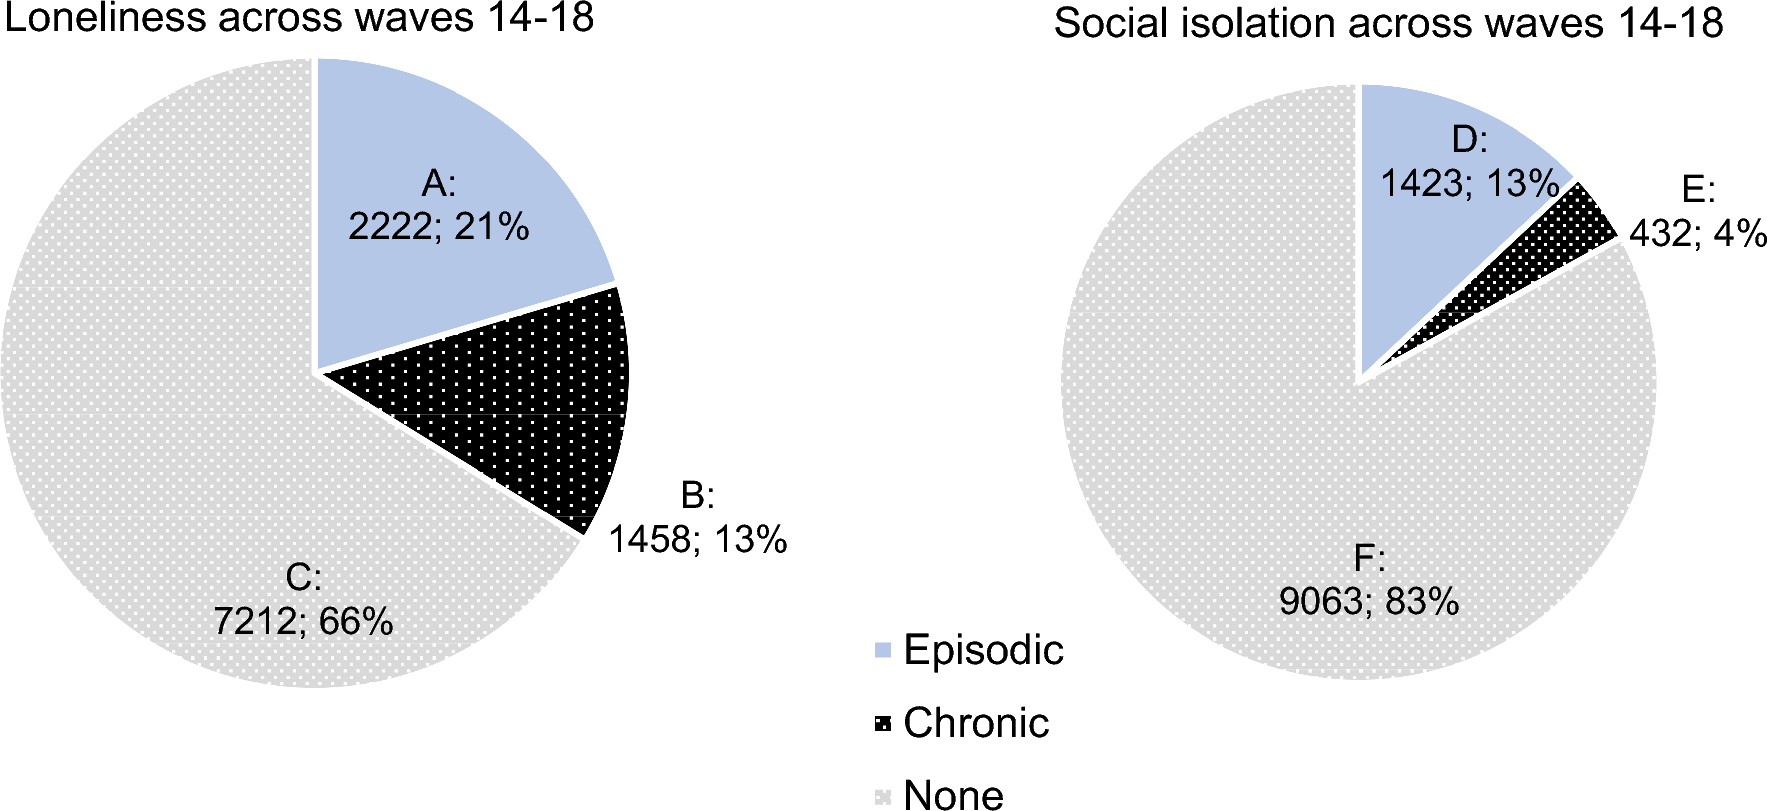 Social Isolation and Loneliness in Older Adults: Opportunities for the  Health Care System